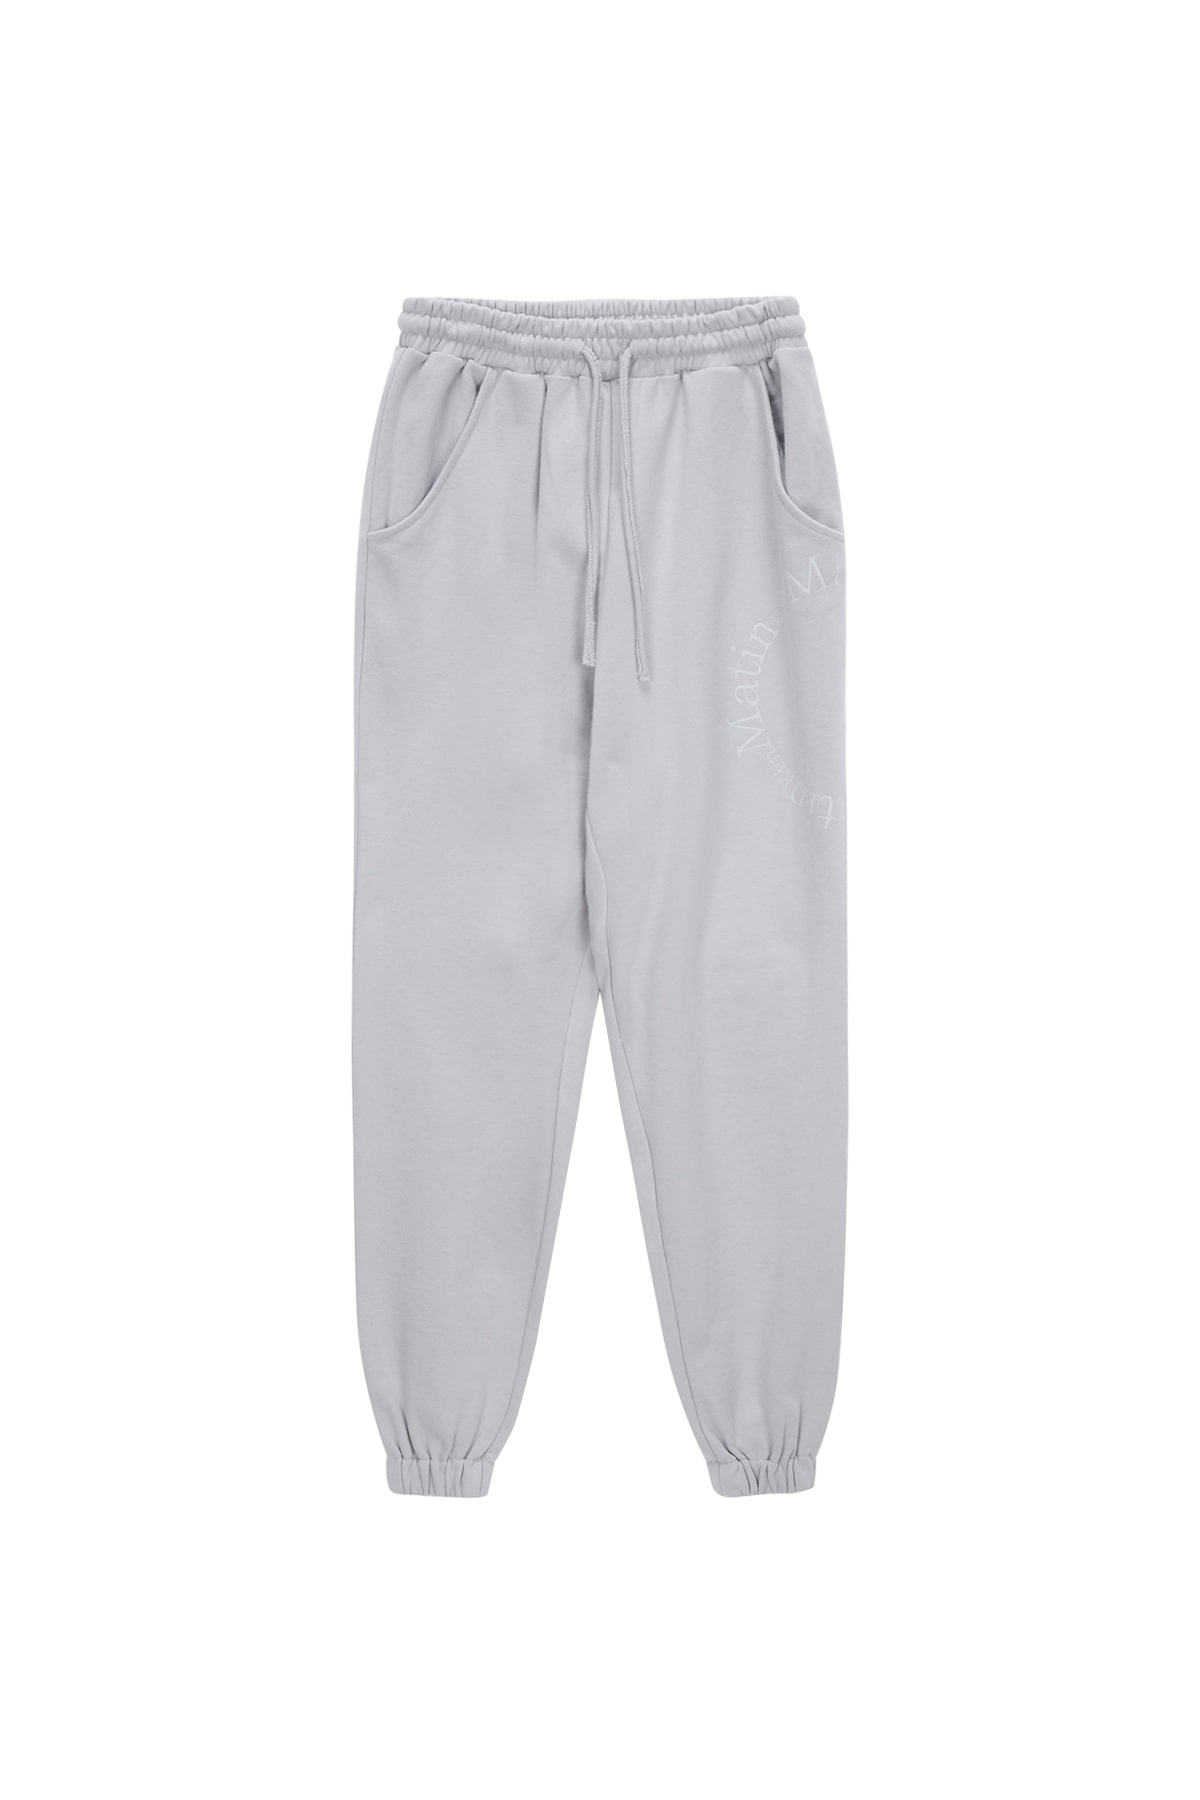 SOLID LOGO JOGGER PANTS IN SKY